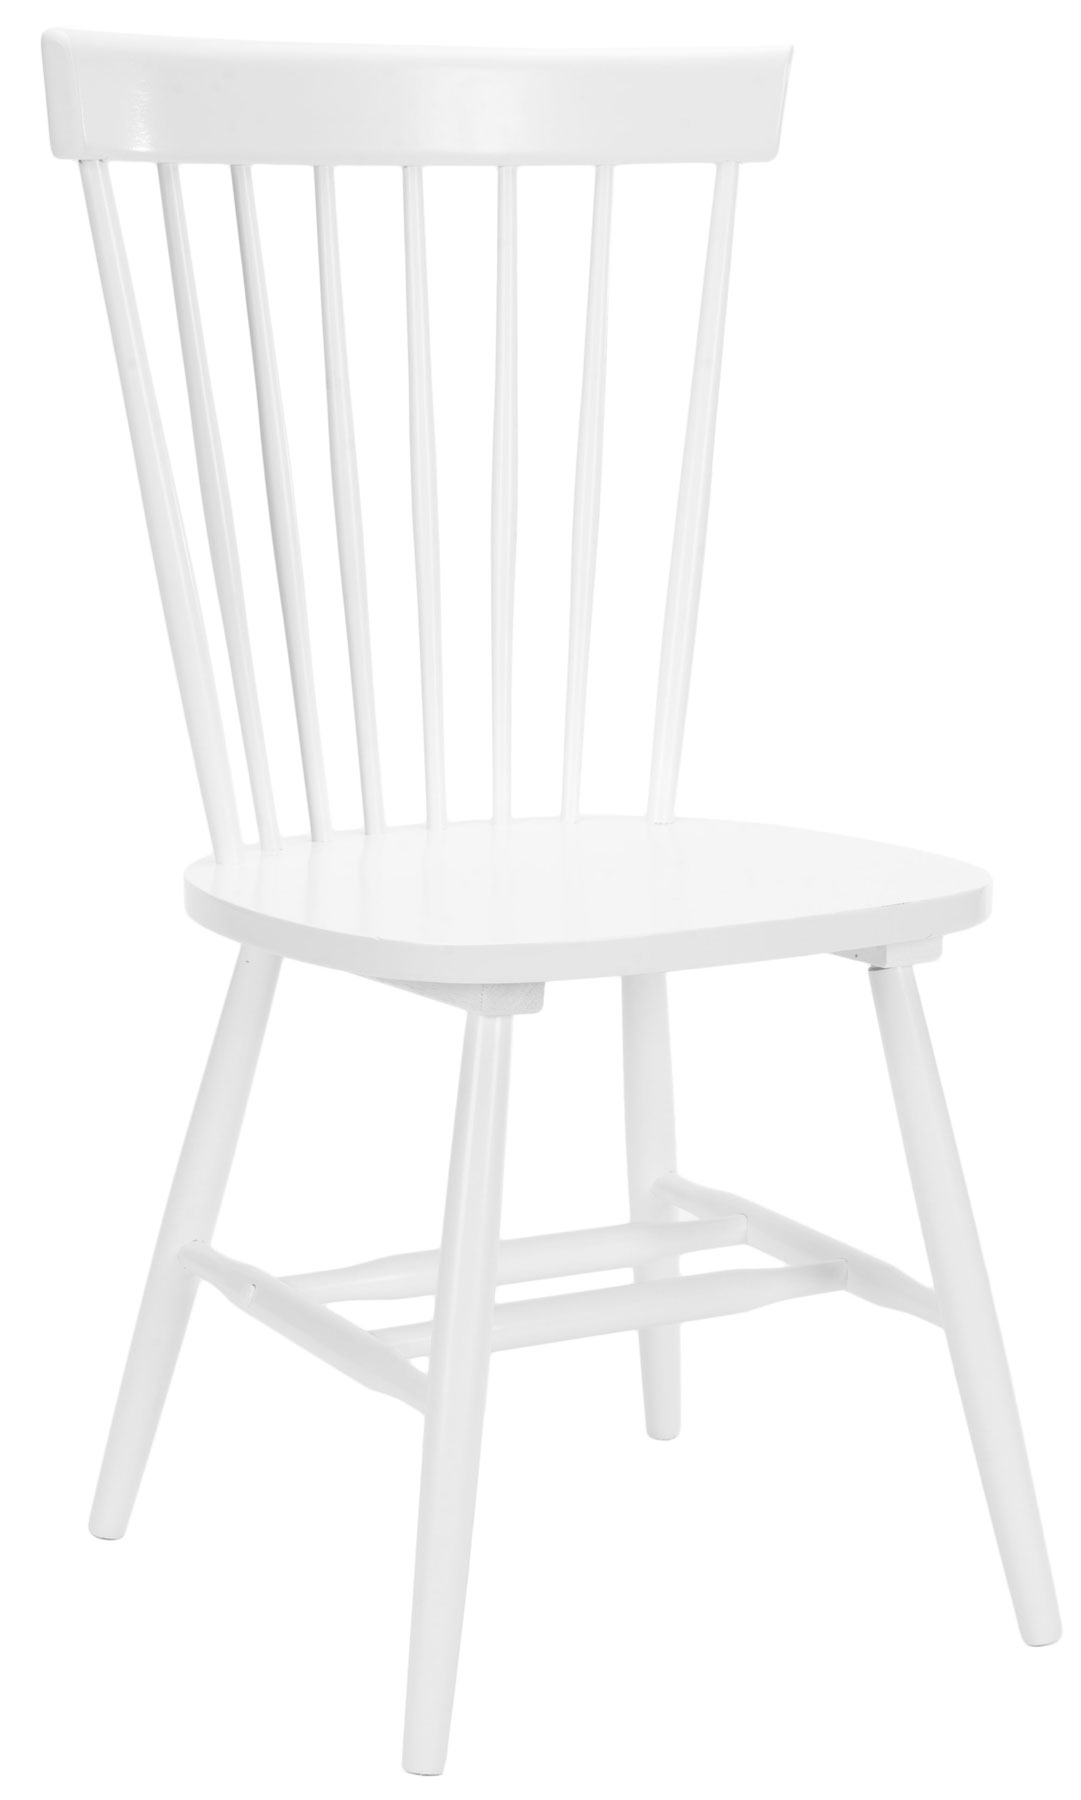 Romy Spindle Dining Chair, White, Set Of 2 - Image 1